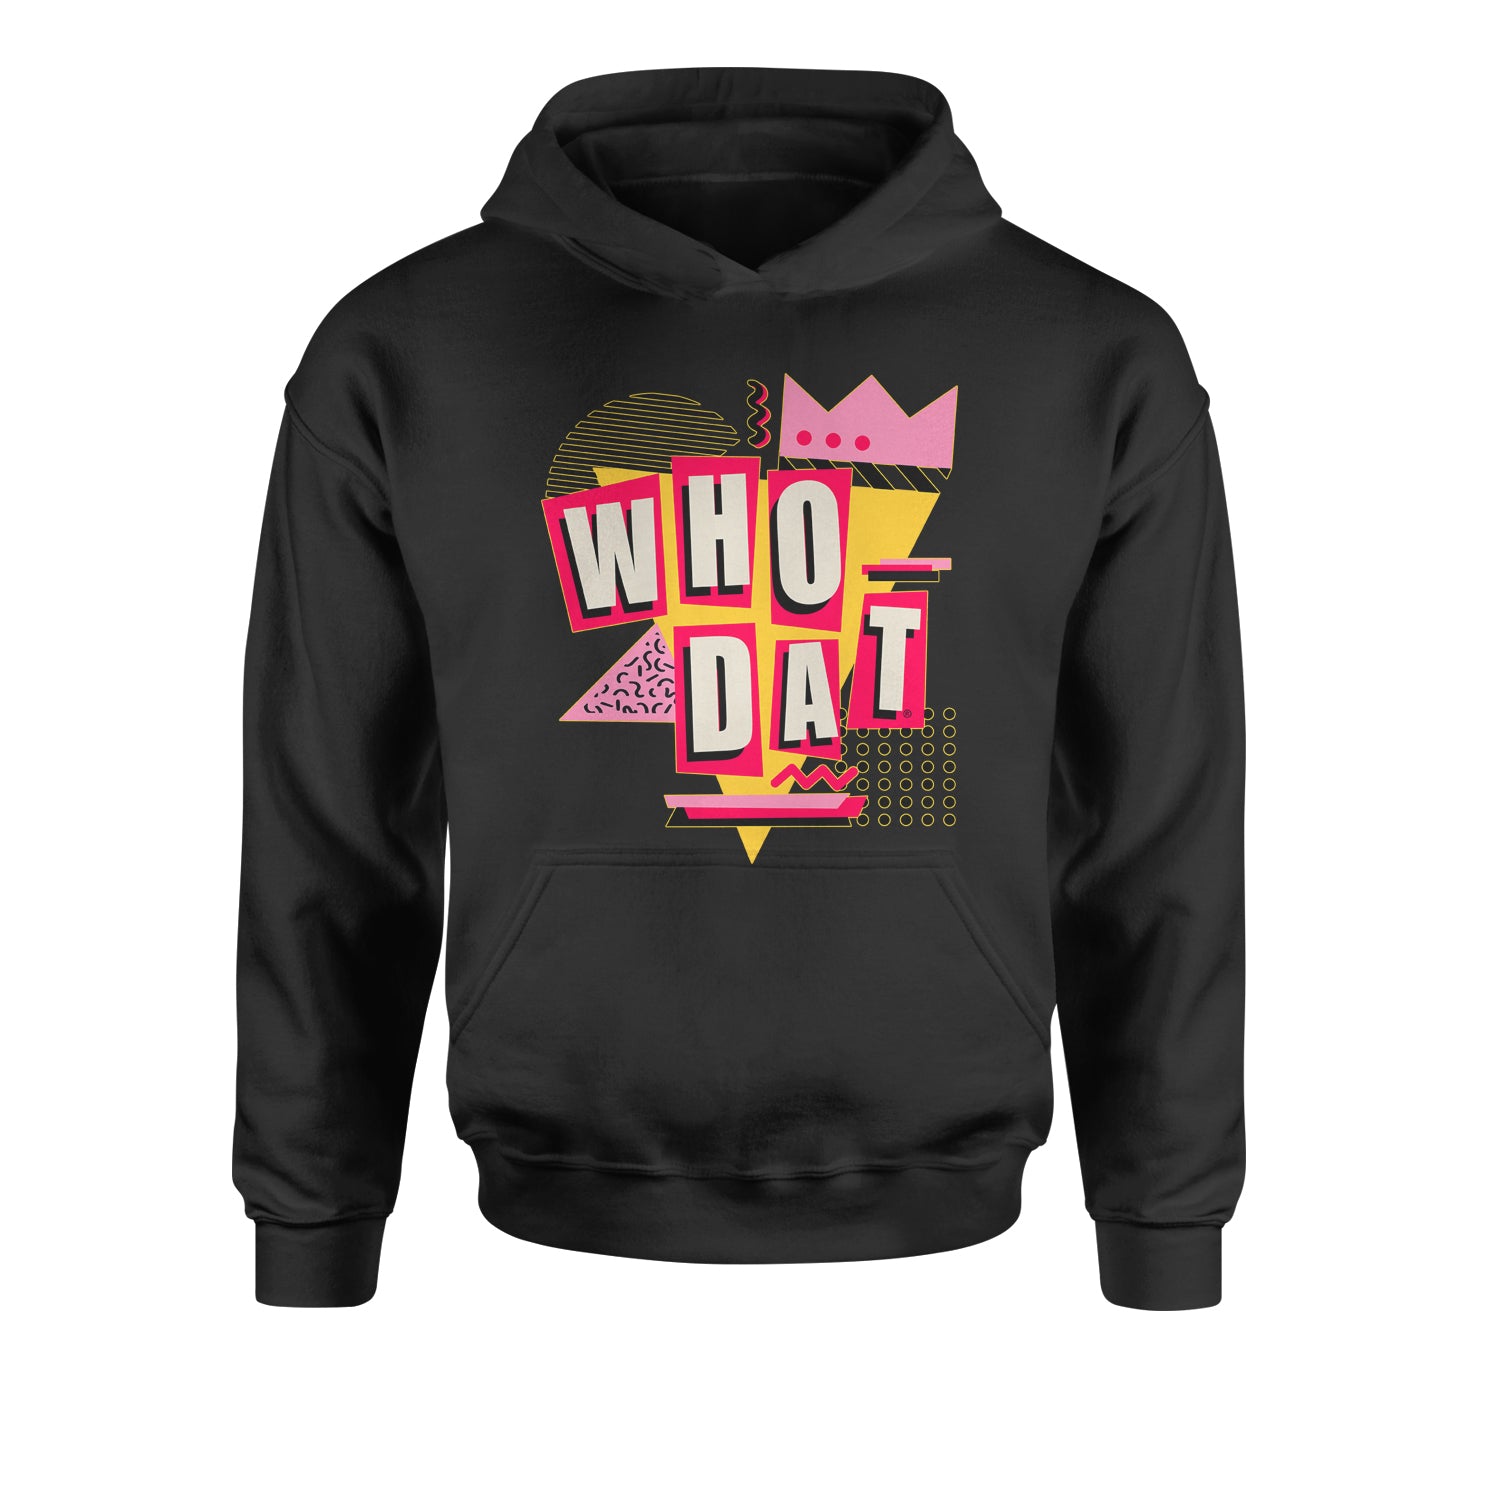 Who Dat New Orleans Youth-Sized Hoodie brees, colston, drew, louisiana, marques, payton, sean by Expression Tees